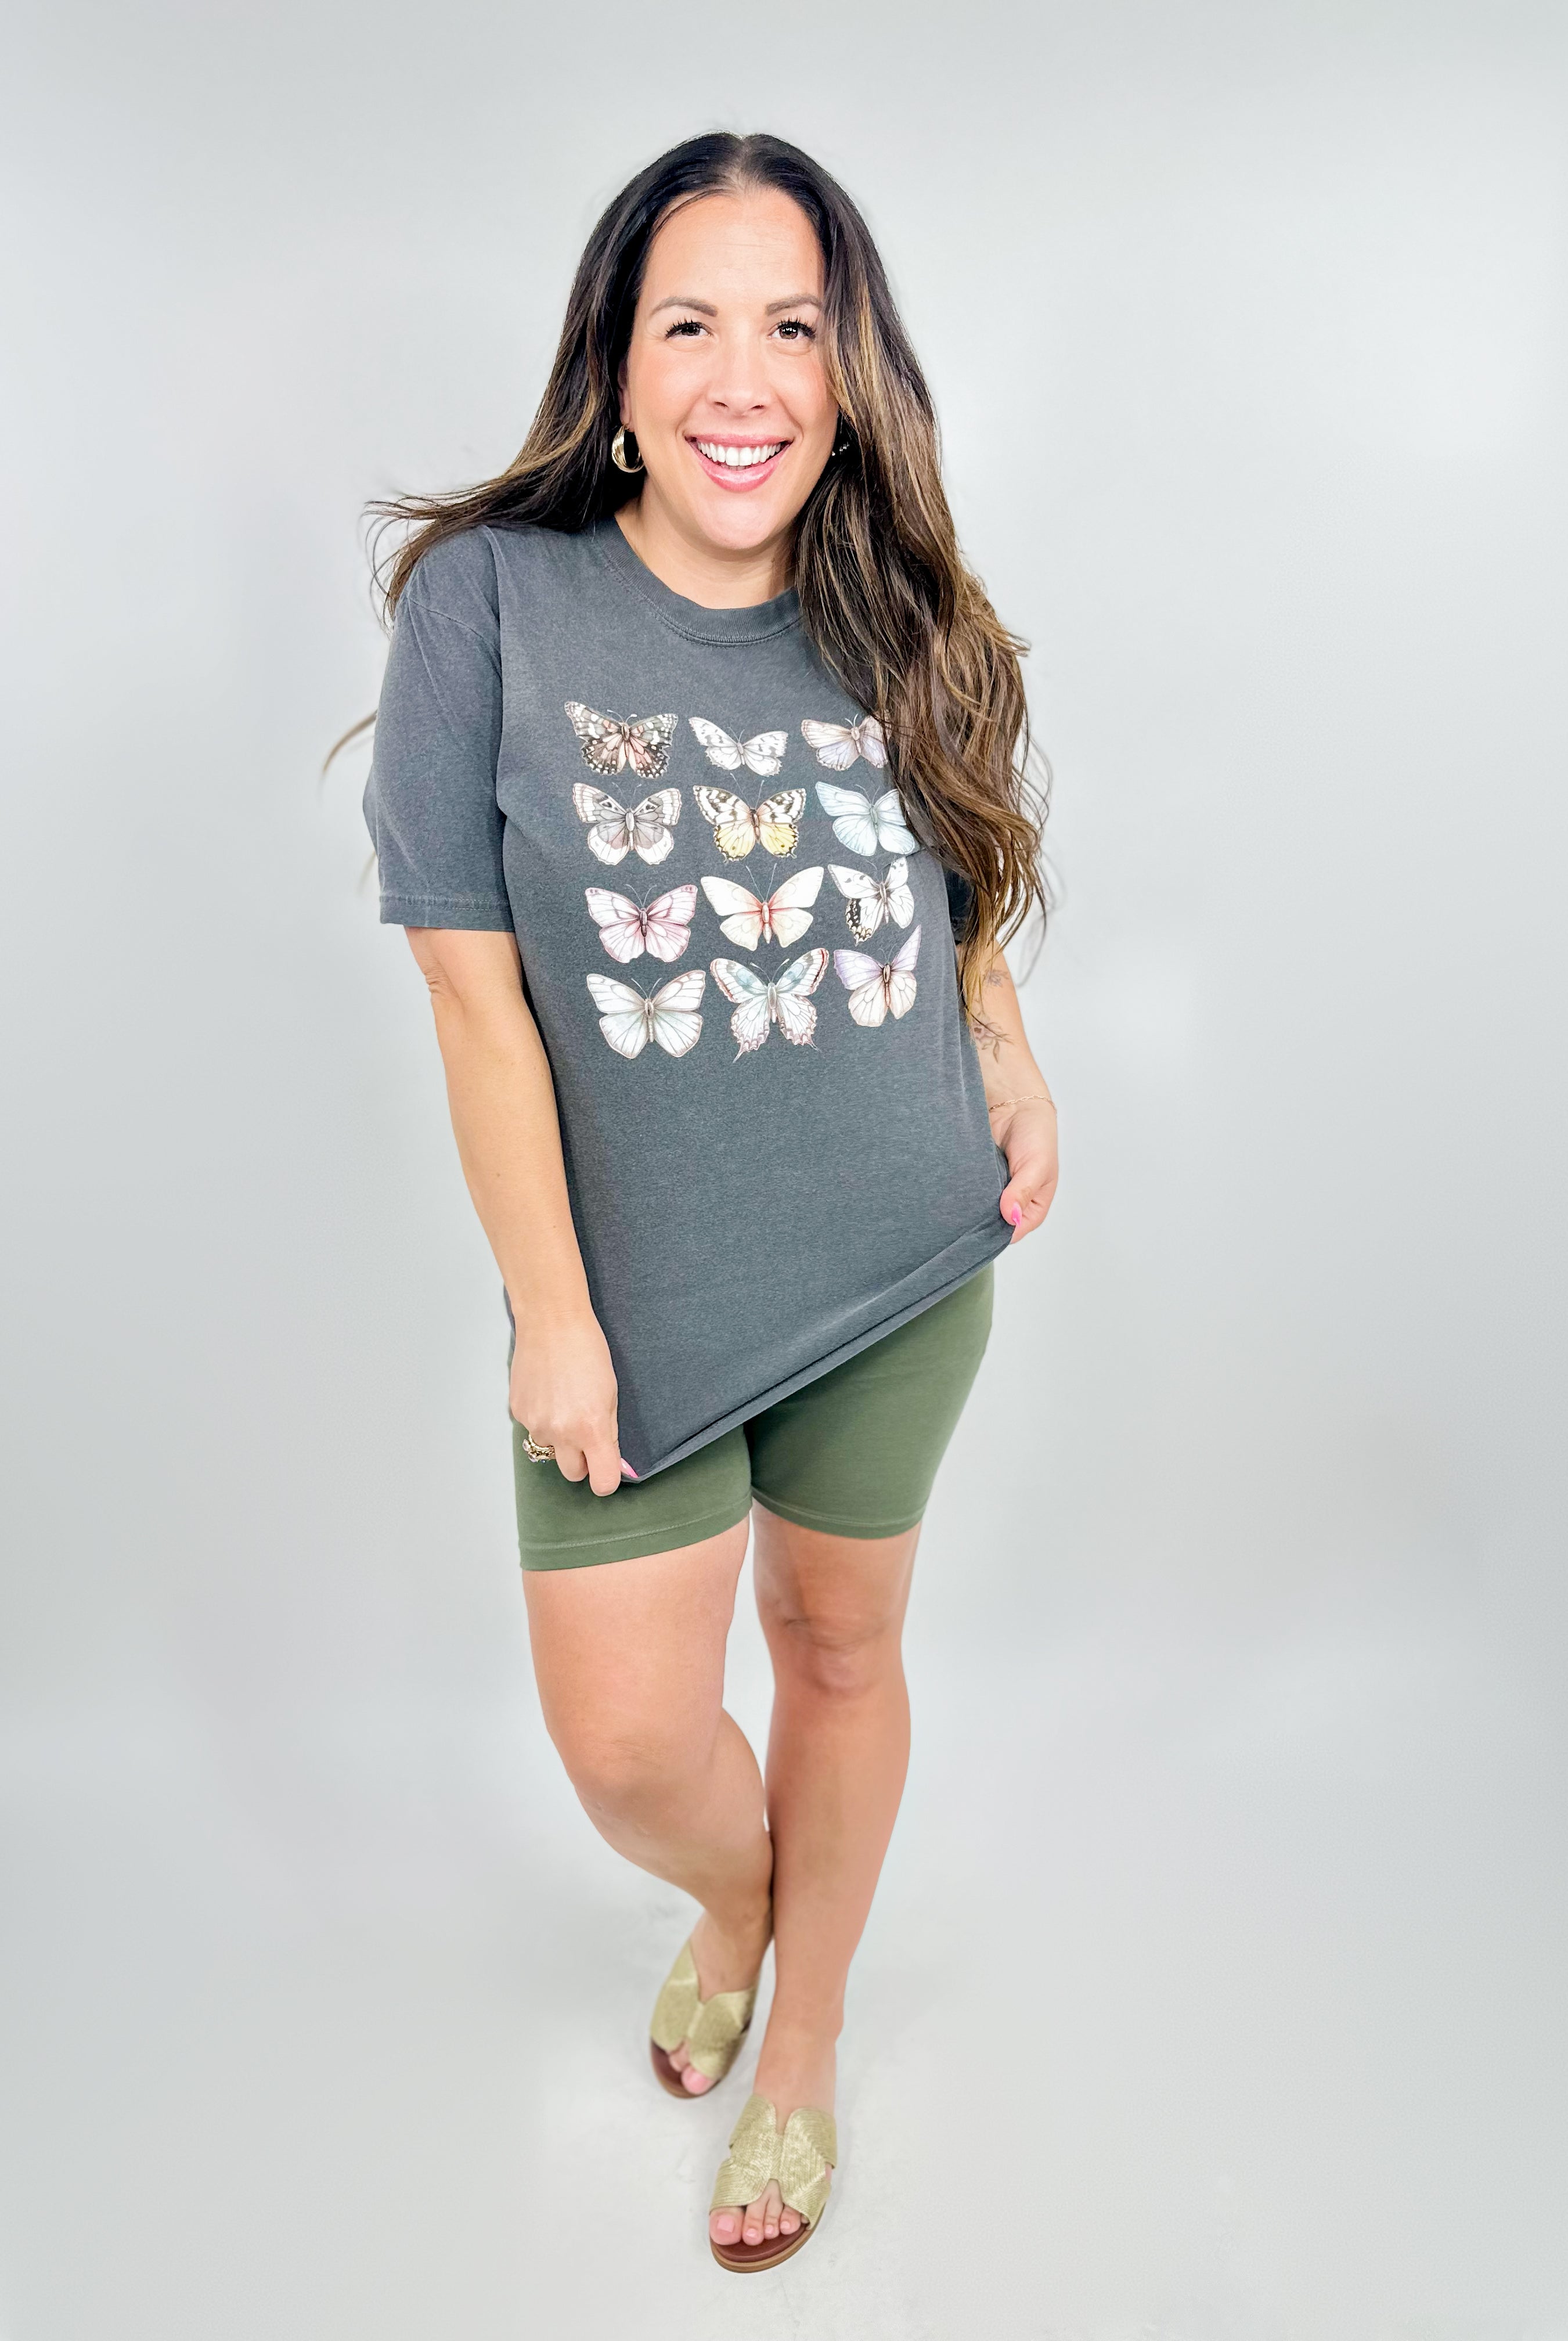 Pastel Butterflies Graphic Tee-130 Graphic Tees-Heathered Boho-Heathered Boho Boutique, Women's Fashion and Accessories in Palmetto, FL